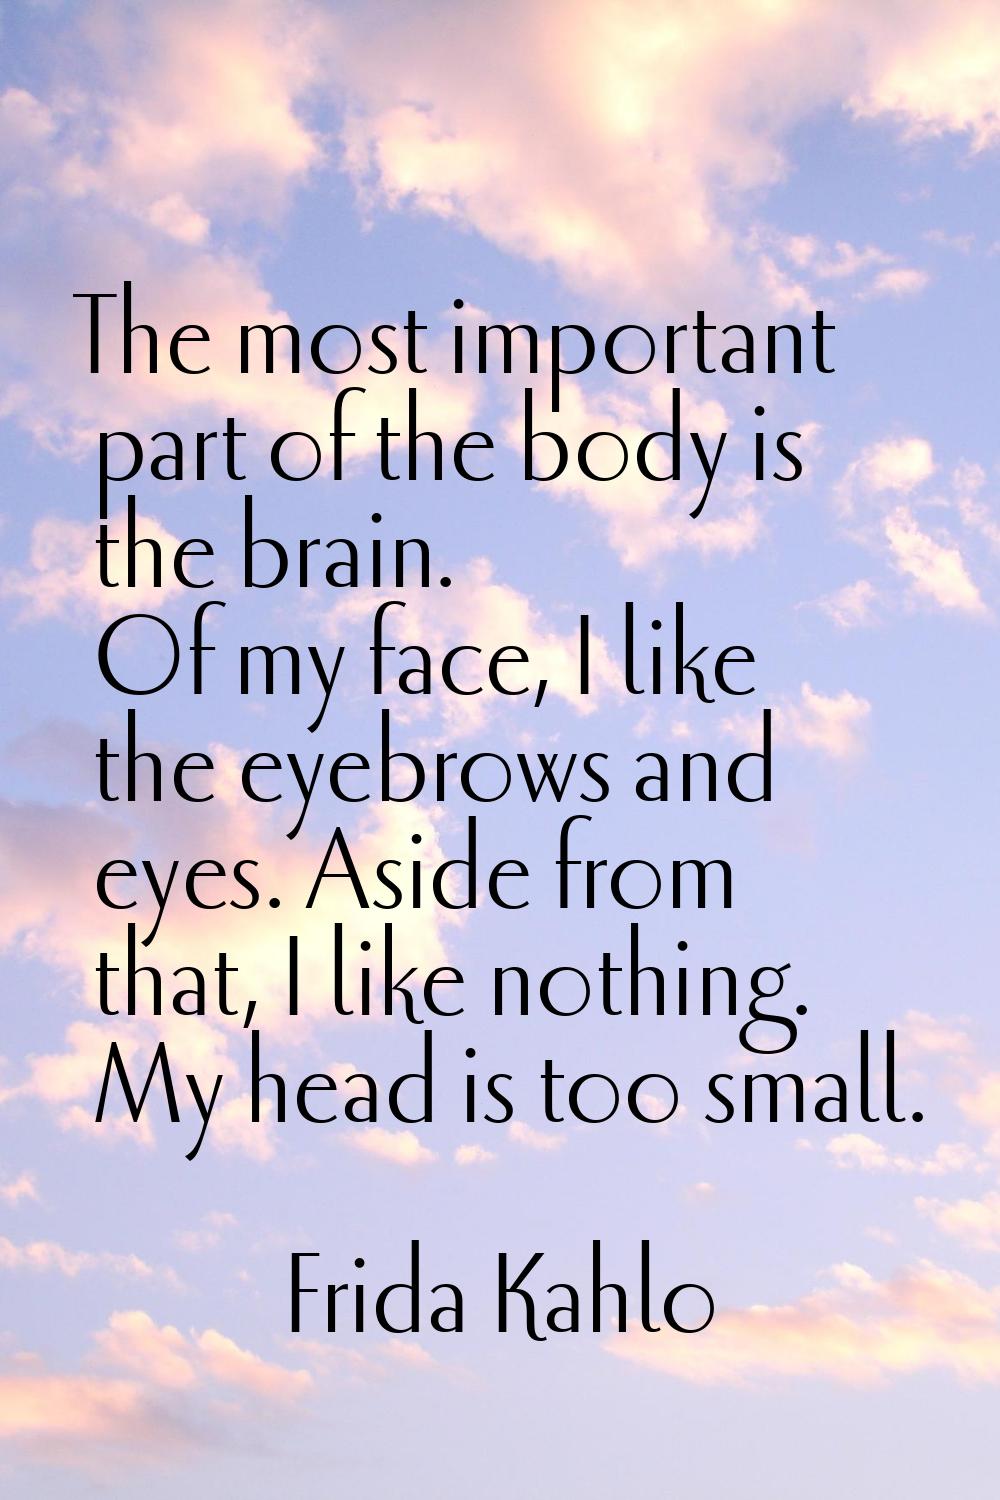 The most important part of the body is the brain. Of my face, I like the eyebrows and eyes. Aside f